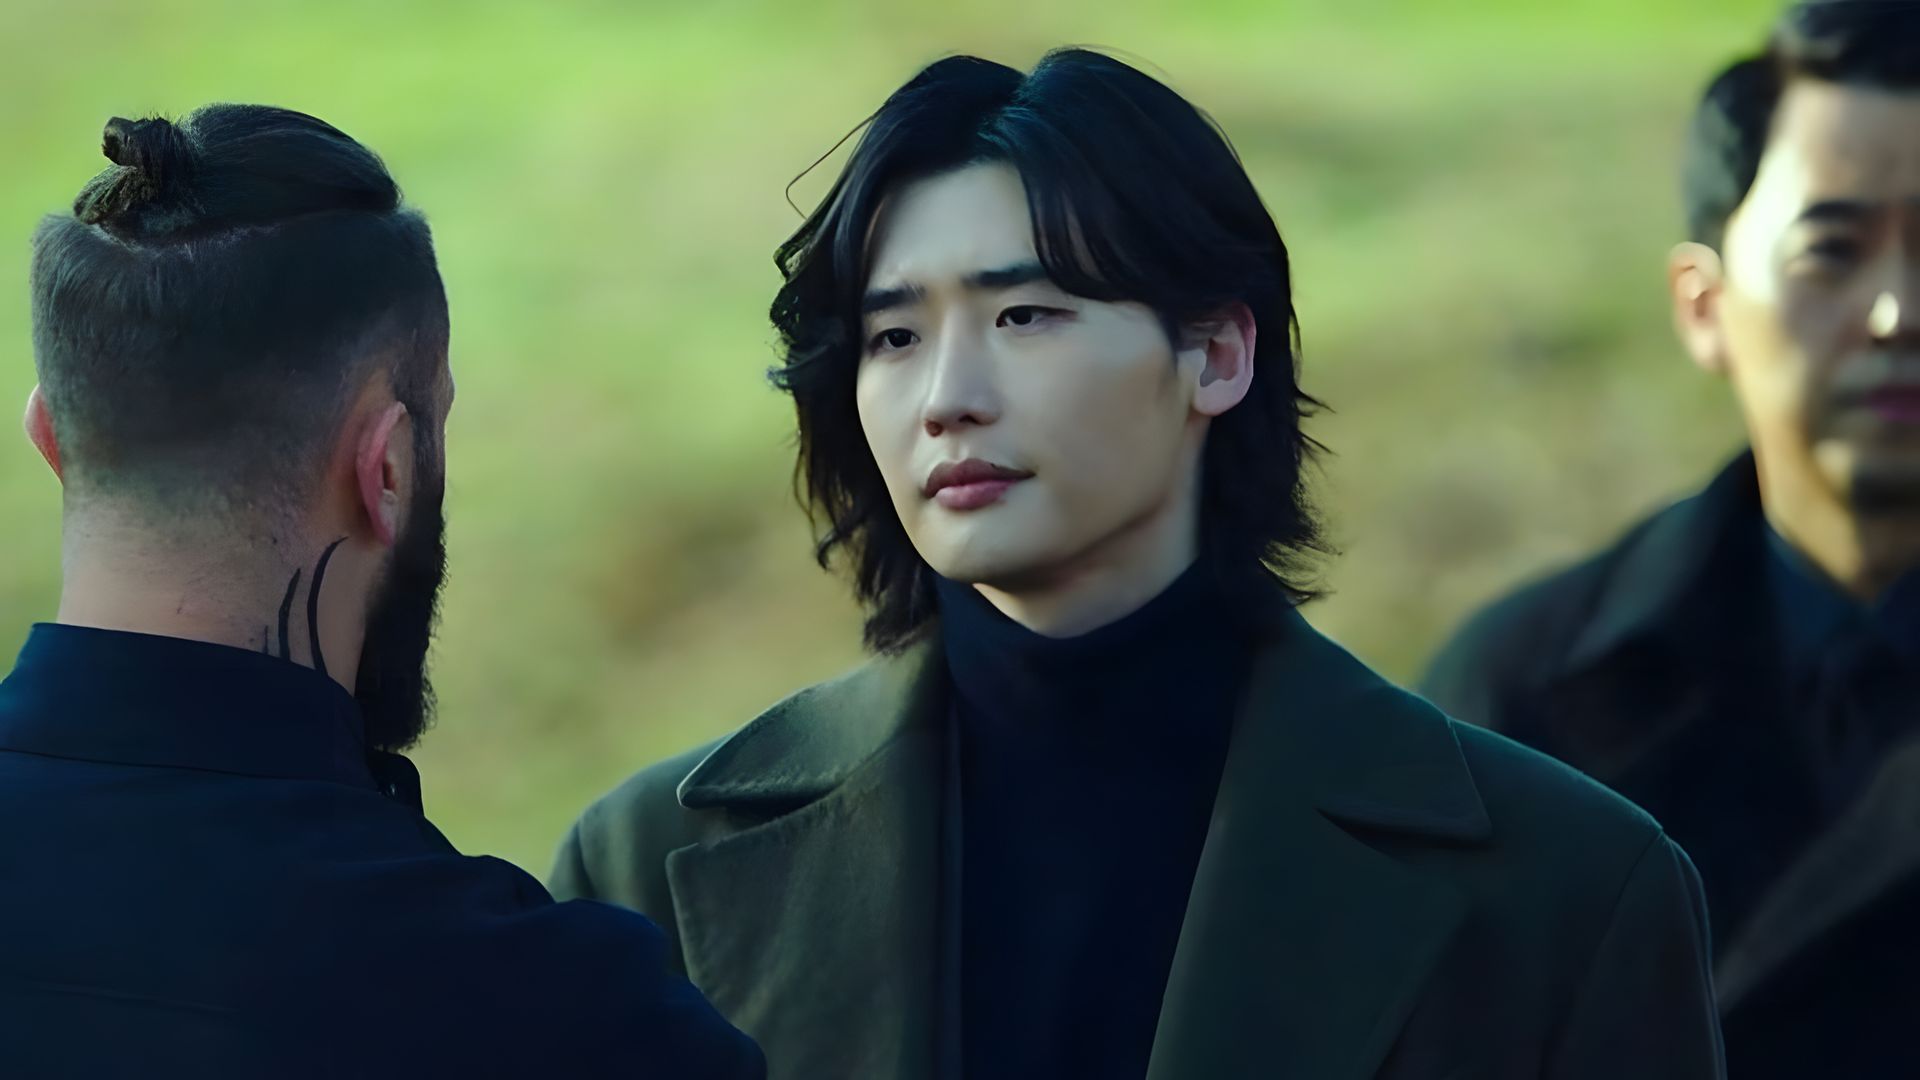 Lee Jong-suk in the movie 'The Witch: Part 2'